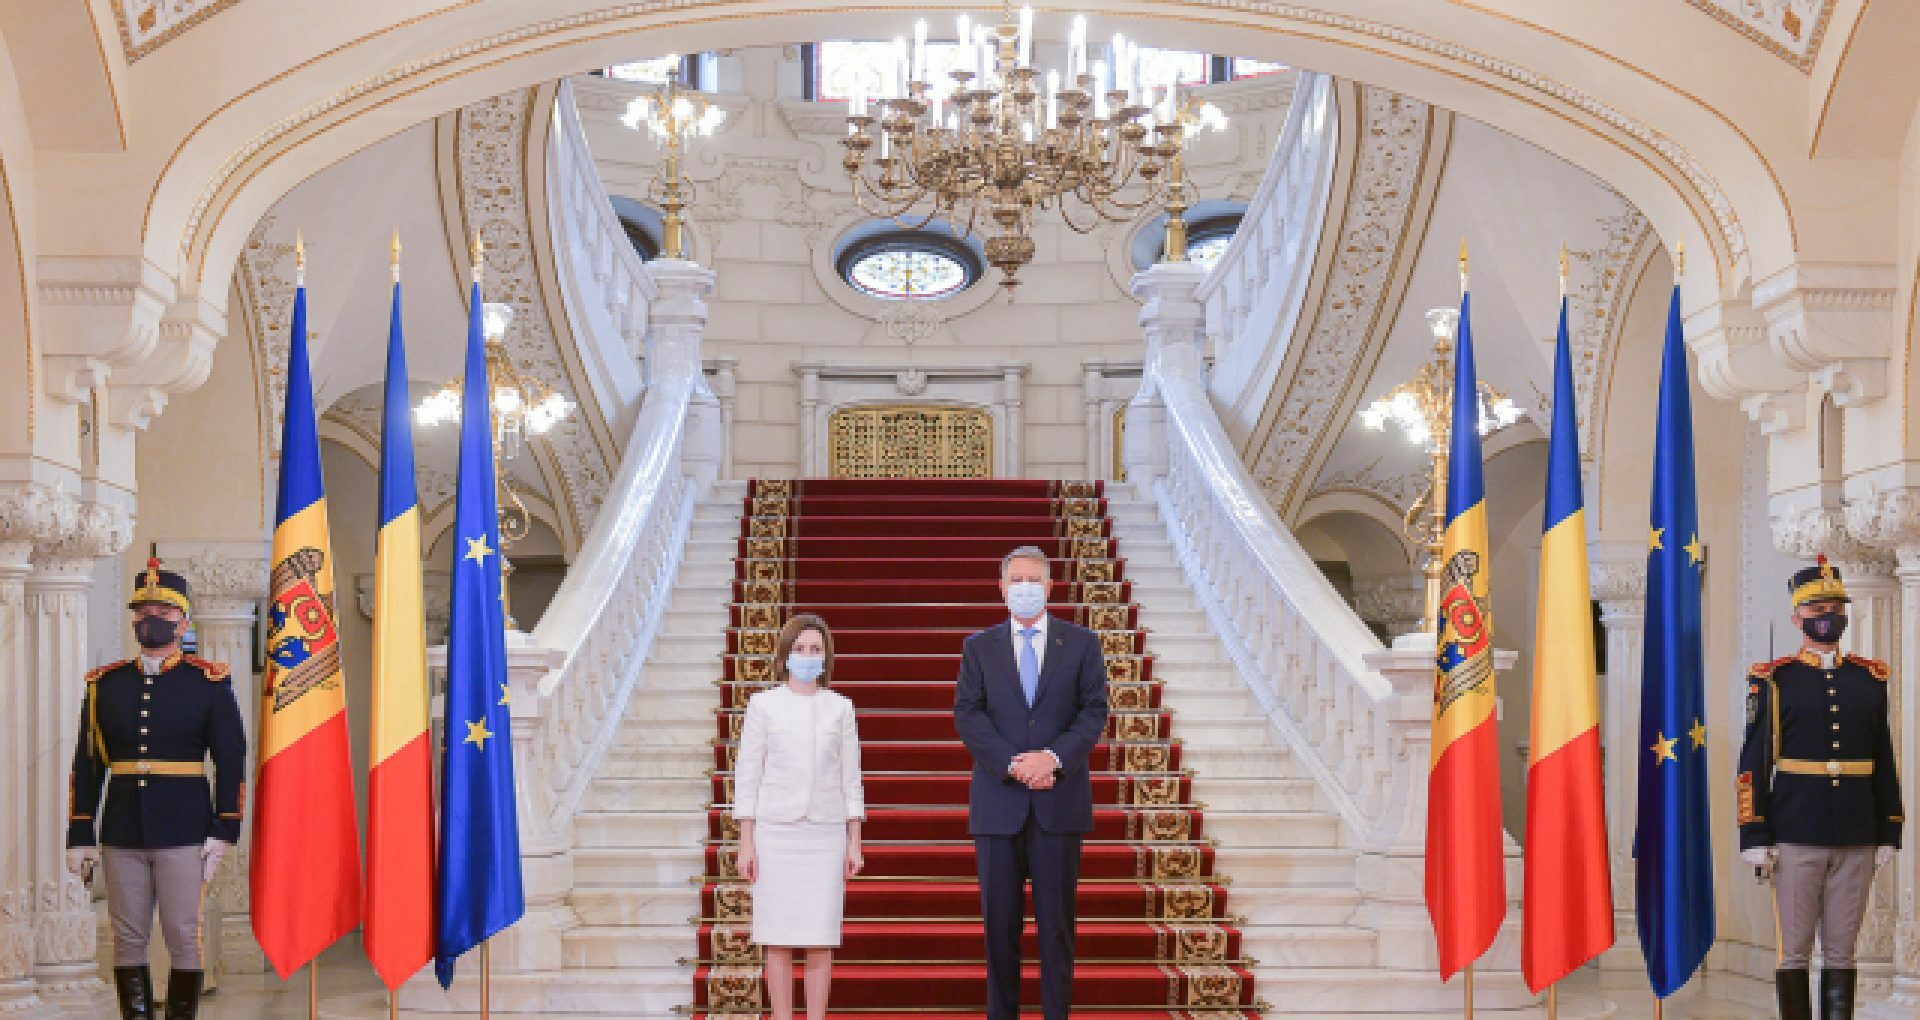 Klaus Iohannis and Maia Sandu, at the Cotroceni Palace: Romania has Shown that It Always Stays Close to Moldova / We Count on Romania’s Voice in the EU